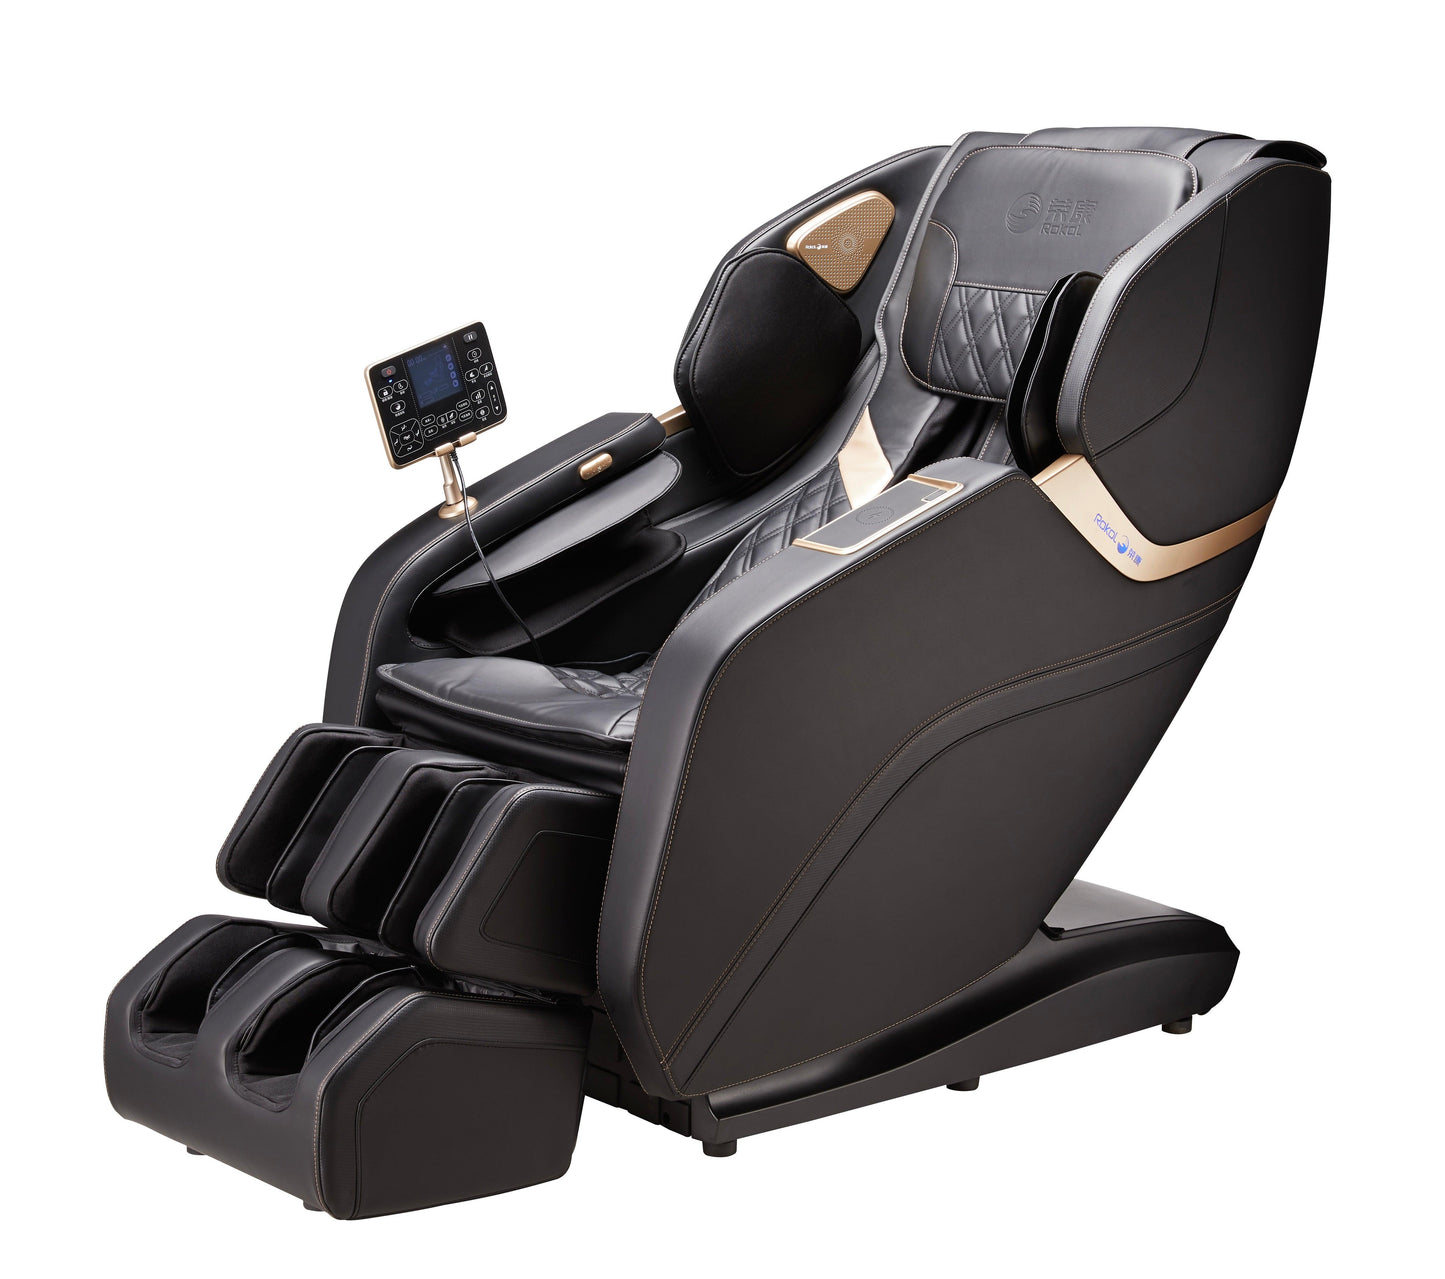 Coolbaby® RK-2001 4D Deluxe Electric Massage Chair with SL Guide Rail - CoolBabyMass